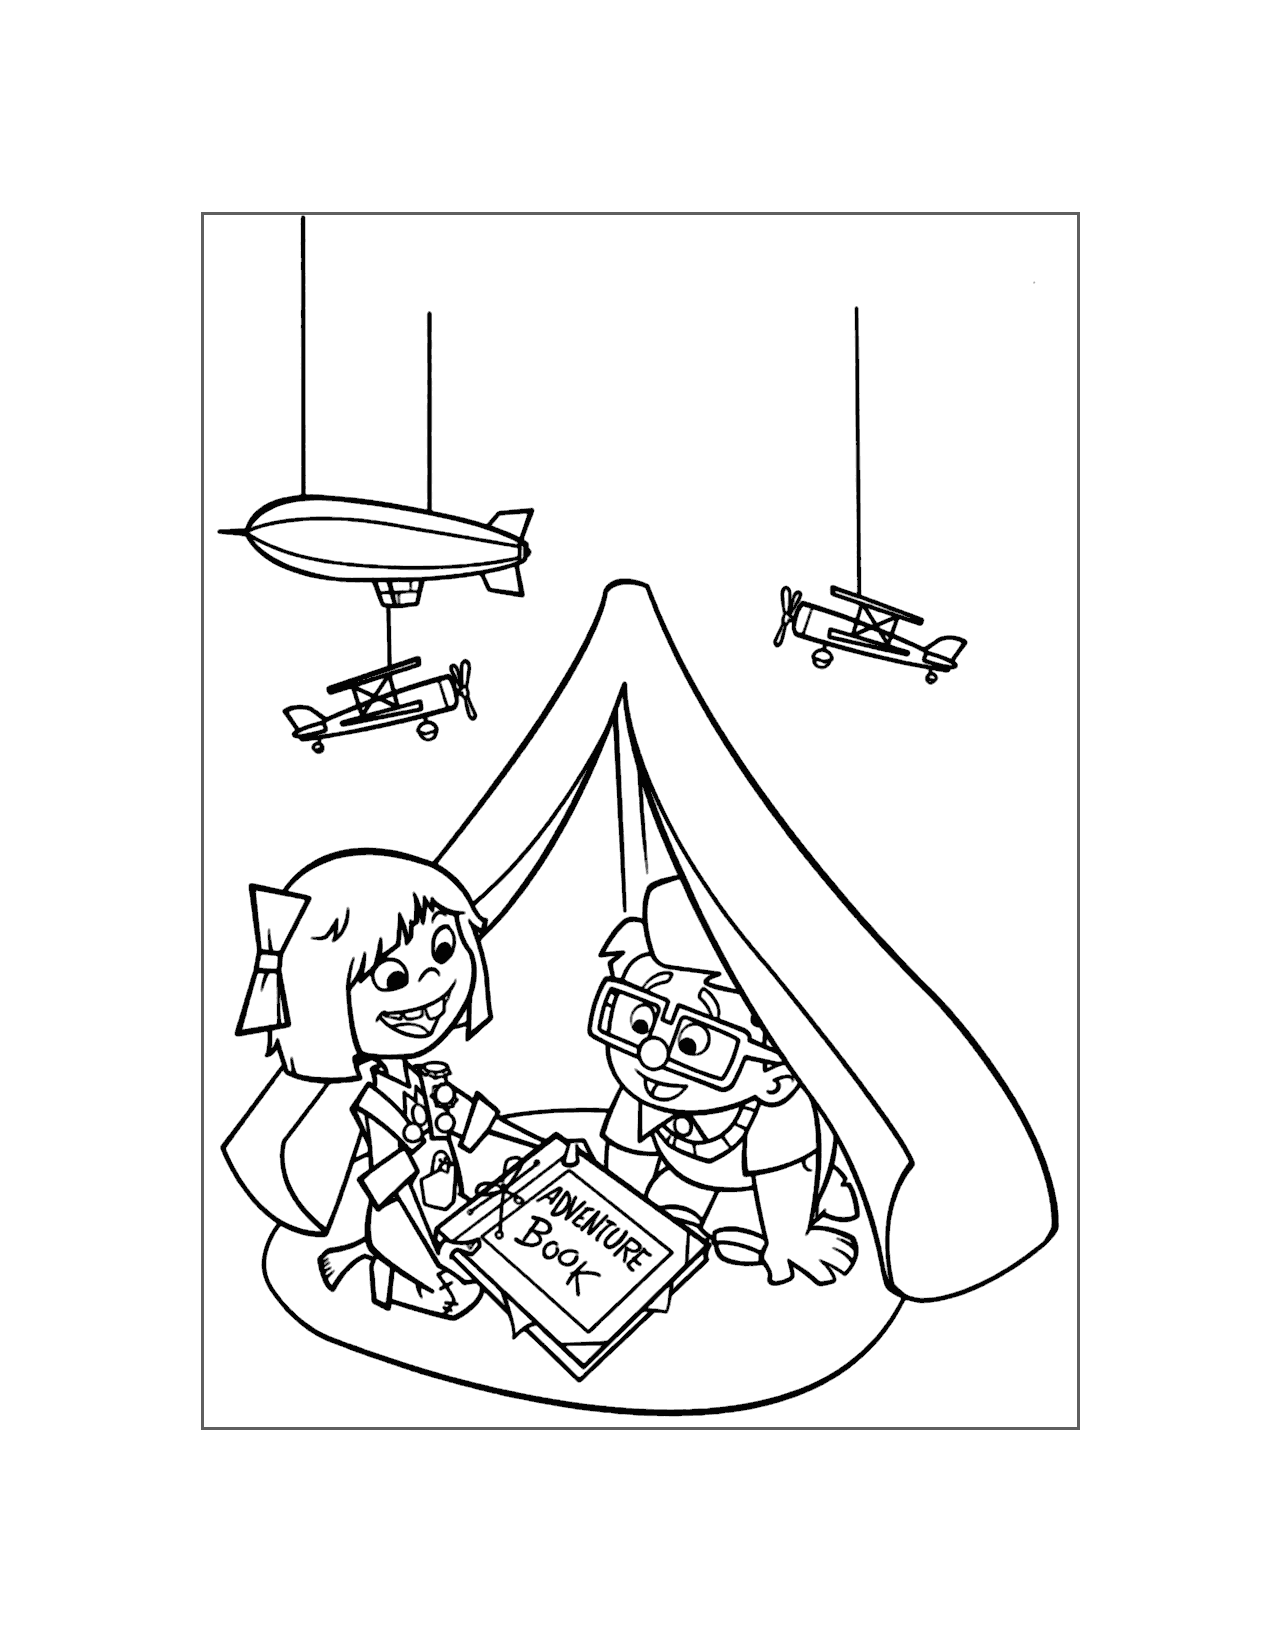 Young Carl And Ellie Play Adventure Up Coloring Page